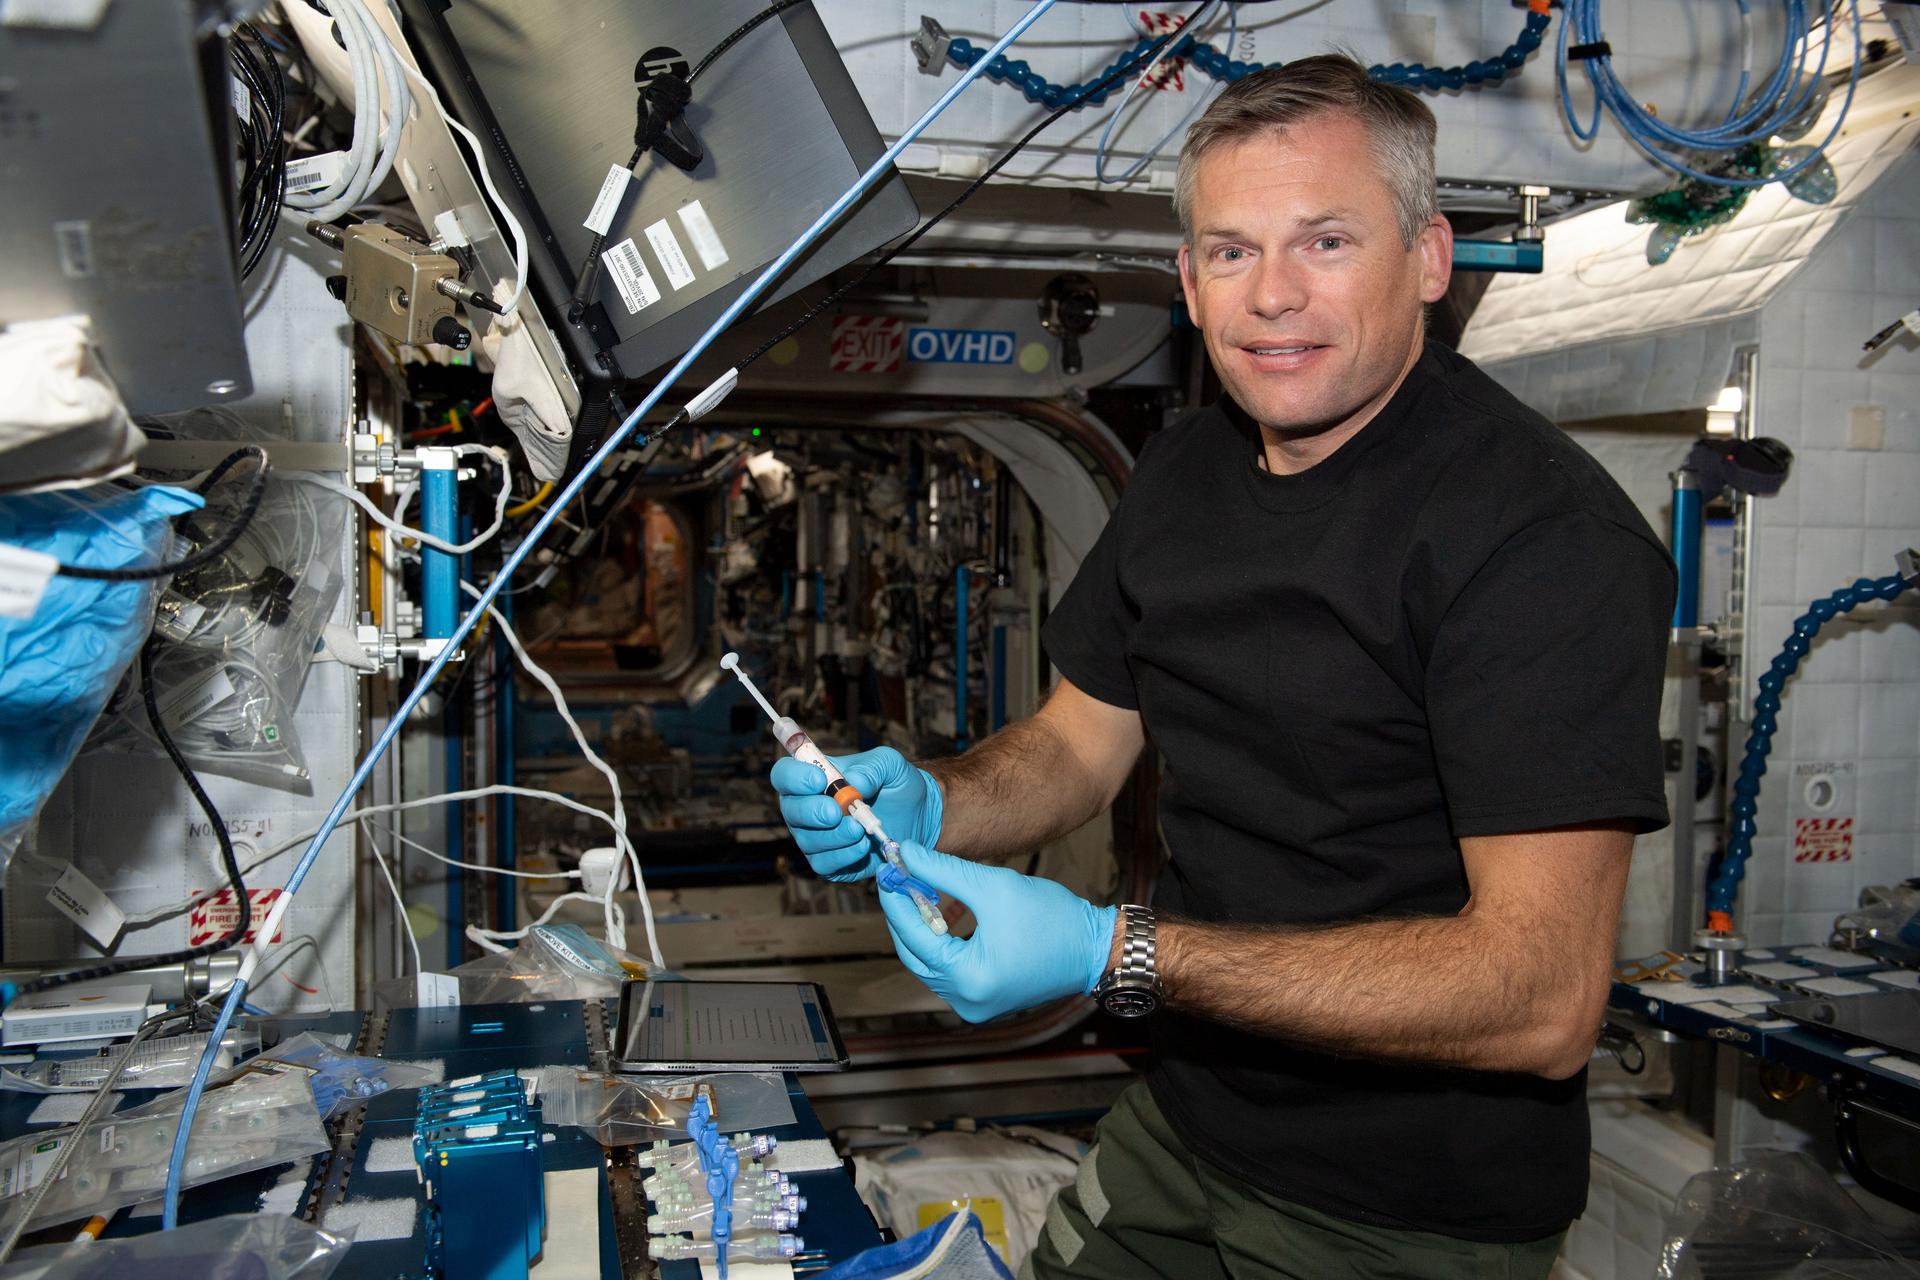 : ESA astronaut Andreas Mogensen, wearing a black t-shirt and green pants, holds a syringe and smiles at the camera. He is holding a syringe with both gloved hands. Several vials are taped to the workbench in front of him.